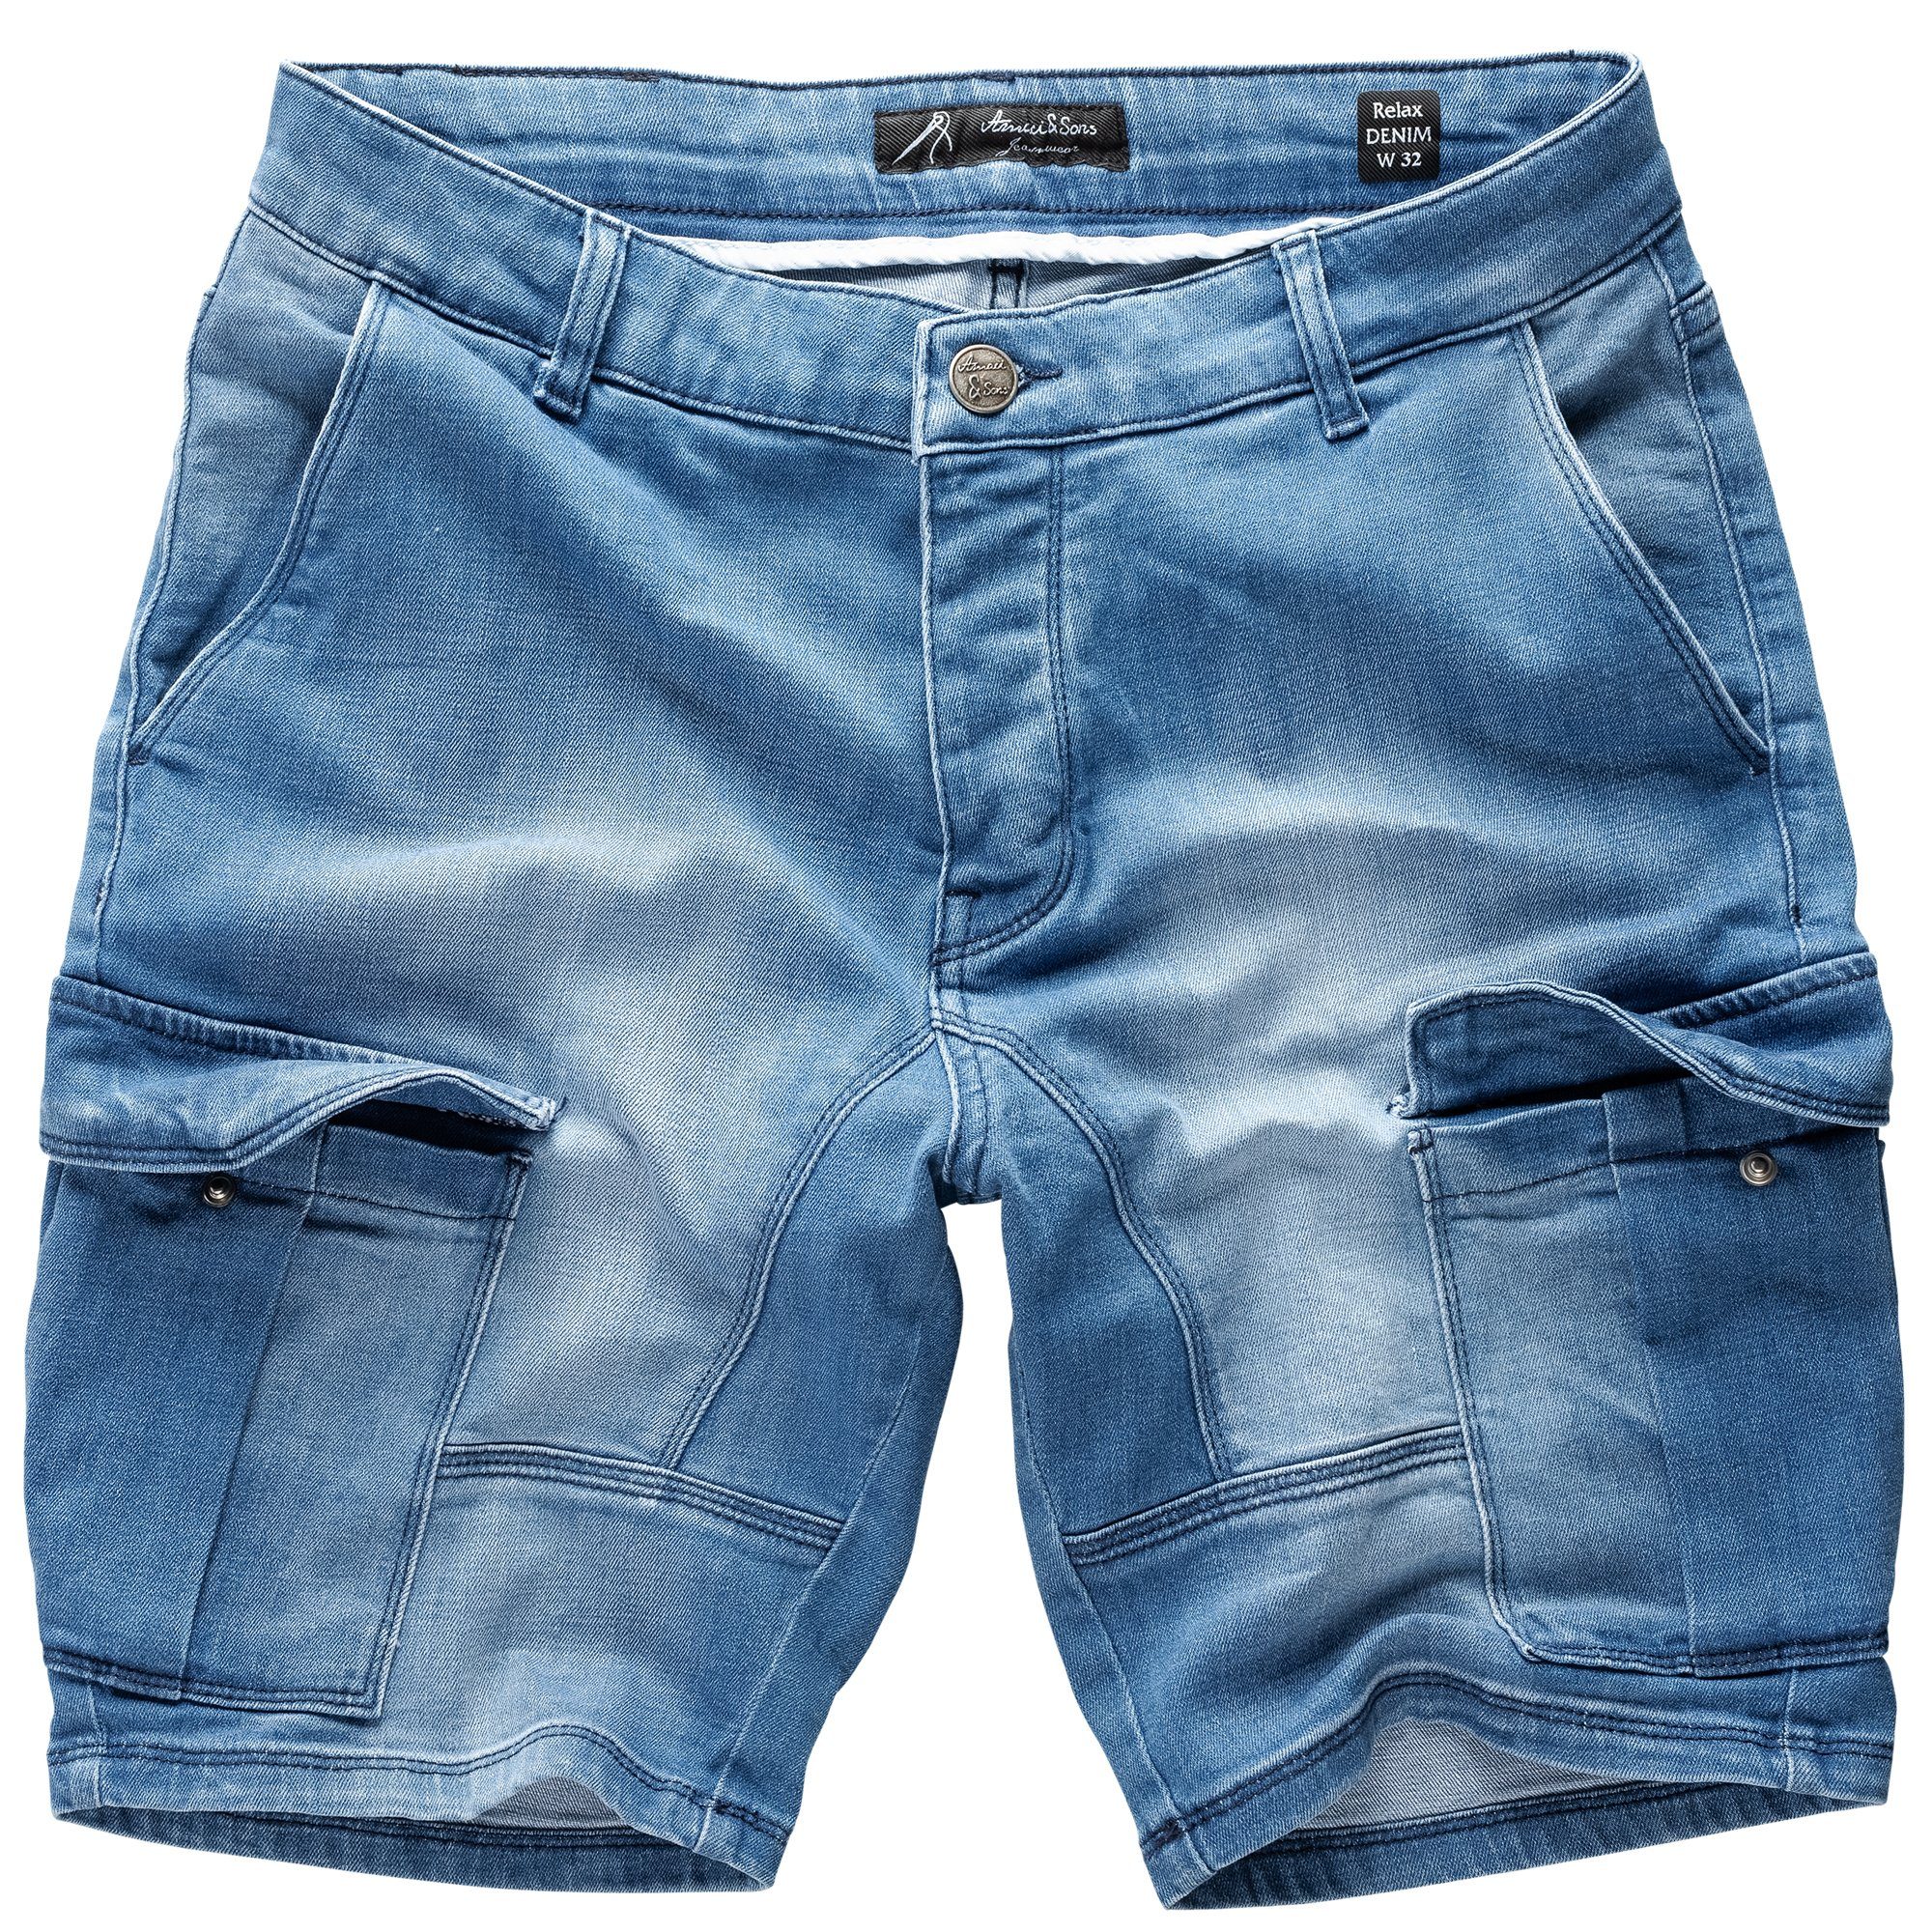 DIEGO Jeans Used Blue (798) Destroyed Amaci&Sons SAN Jeansshorts Shorts